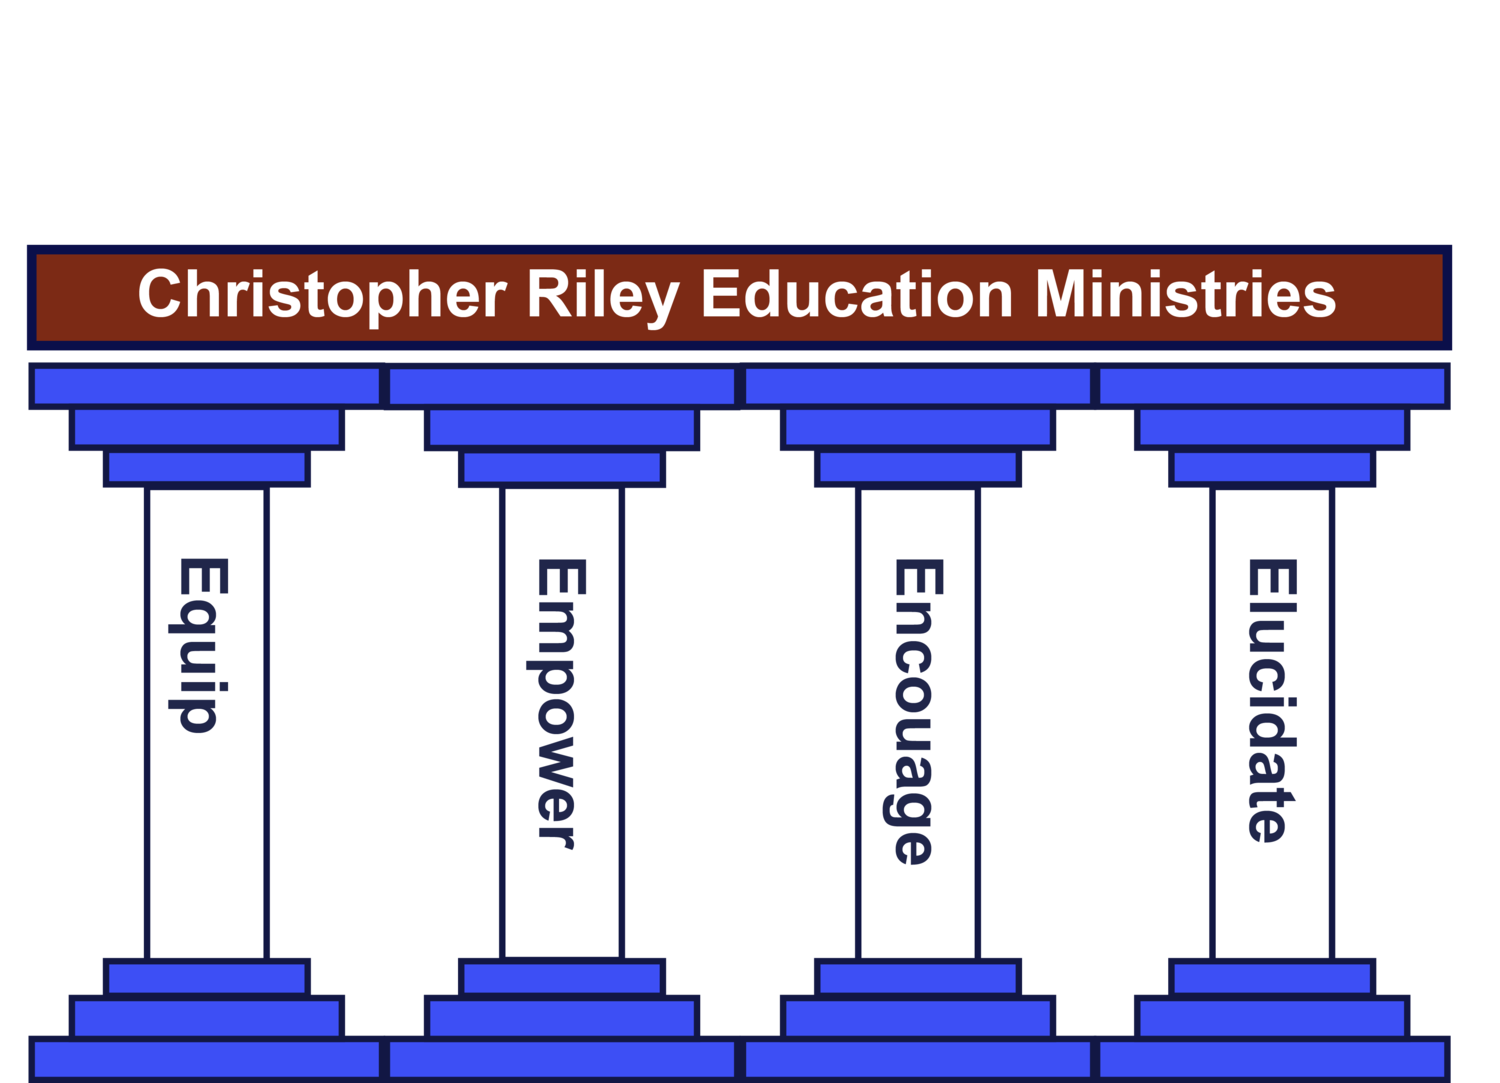 Christopher Riley Education Ministries